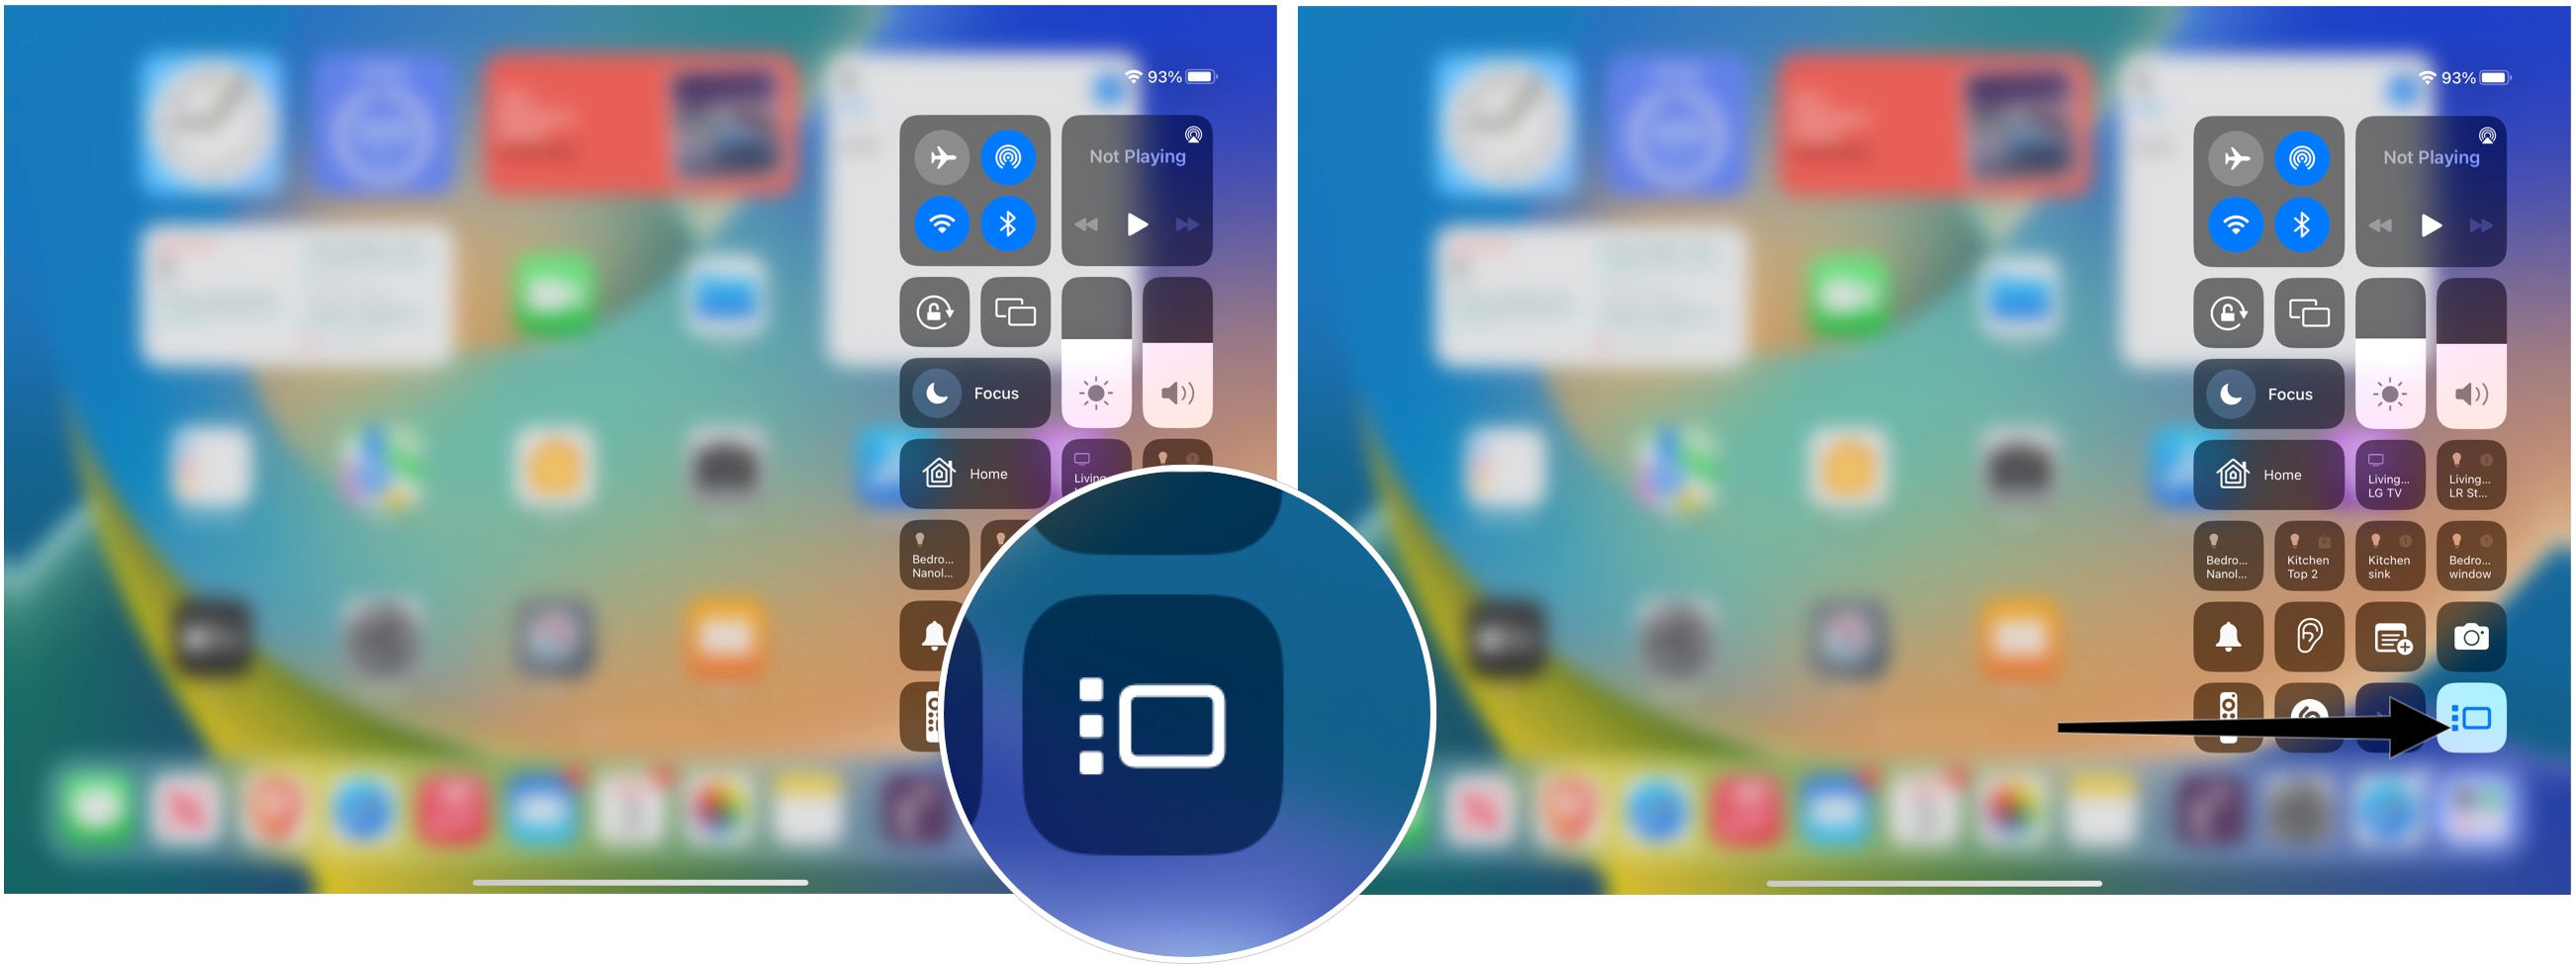 To activate Stage Manager from Control Panel in iPadOS 16: Pull down from the top right of the screen to open Control Center.  Tap the Stage Manager icon to activate.